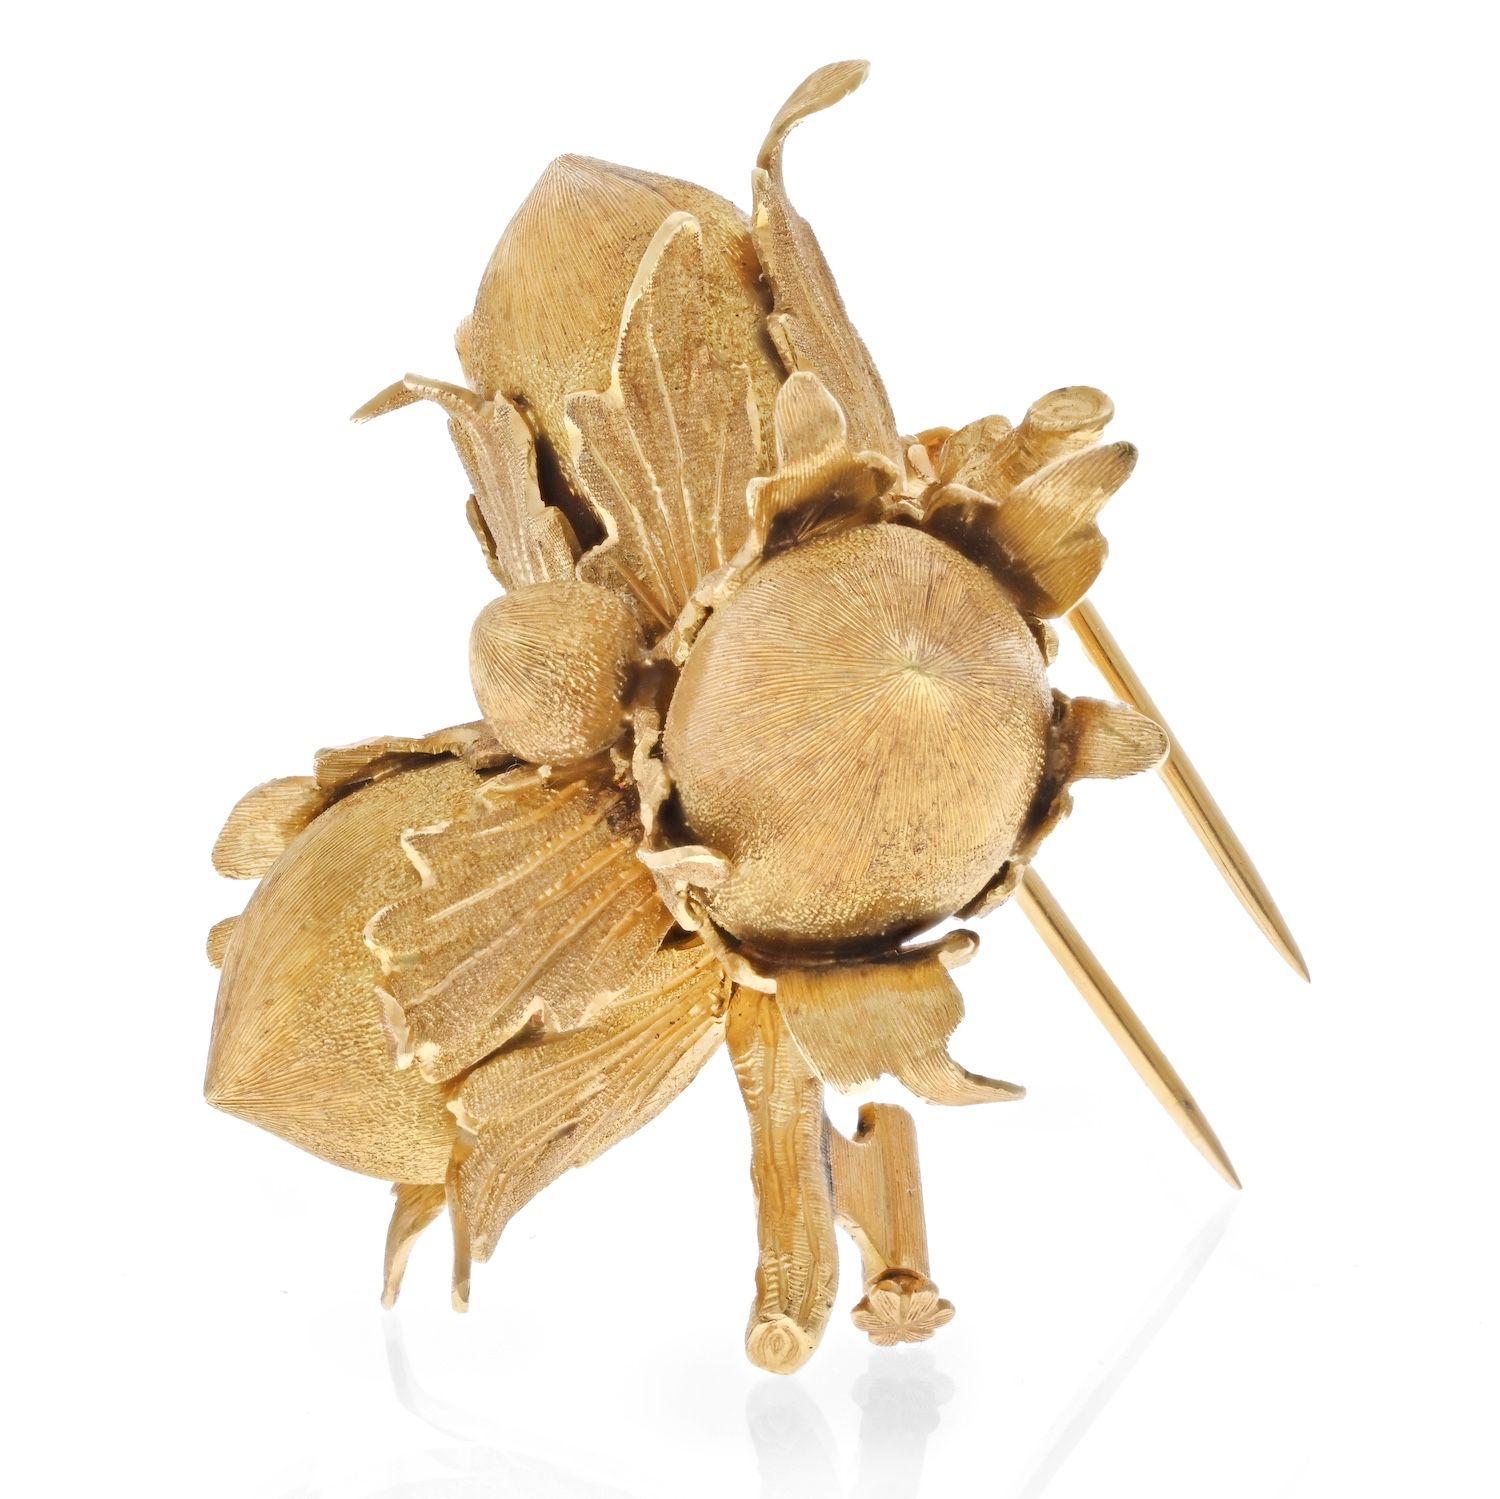 Vintage Buccellati Triple Acorn 18K Gold Brooch.
Three acorns on branch brooch crafted in 18K yellow gold by Mario Buccellati.
Weight: 26.8 Grams 
Measurements: Height: 1.5 inches 
Width: 1.5inches 
Condition: Excellent.